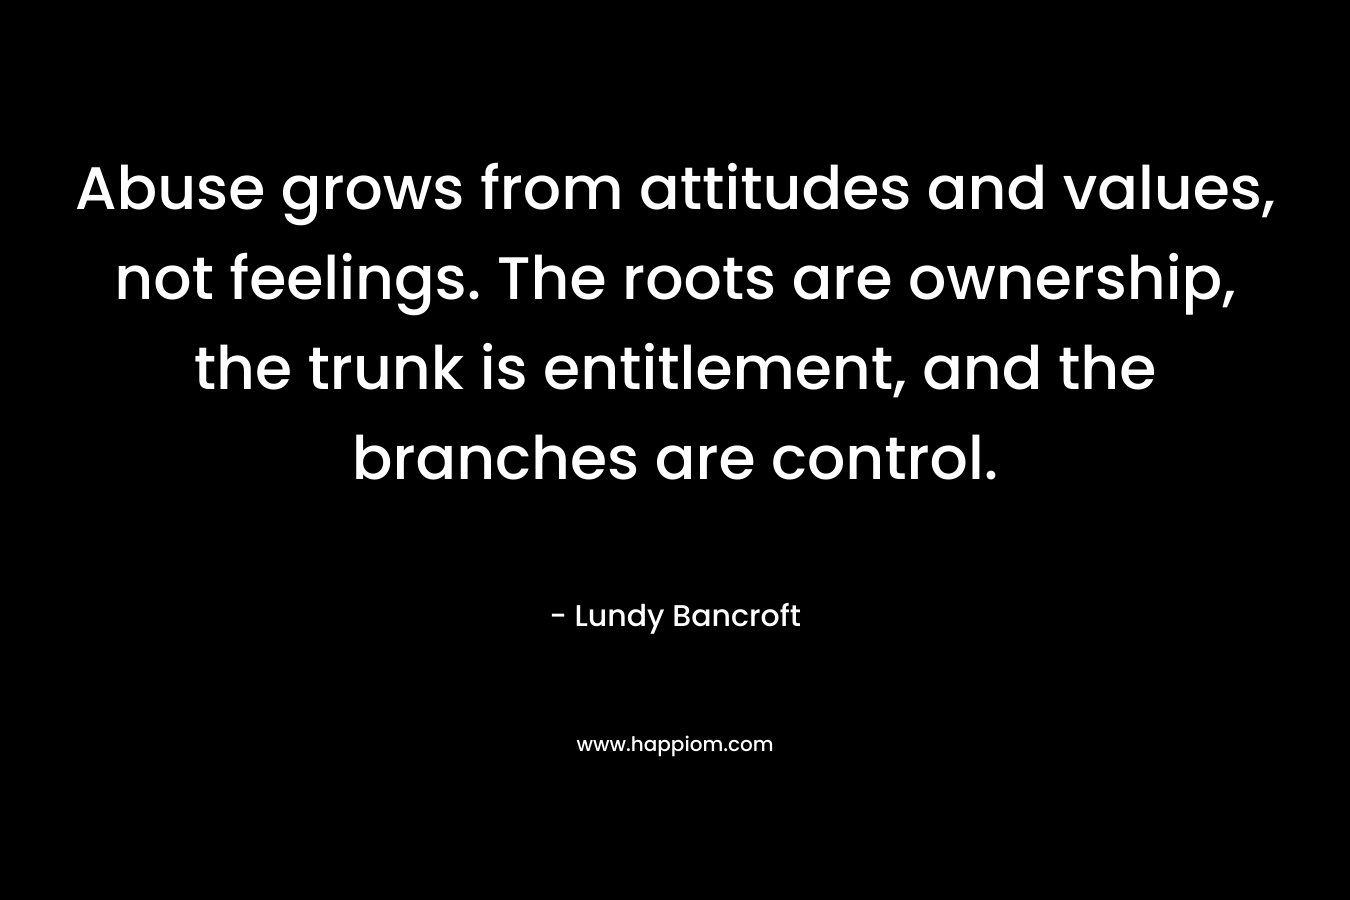 Abuse grows from attitudes and values, not feelings. The roots are ownership, the trunk is entitlement, and the branches are control.